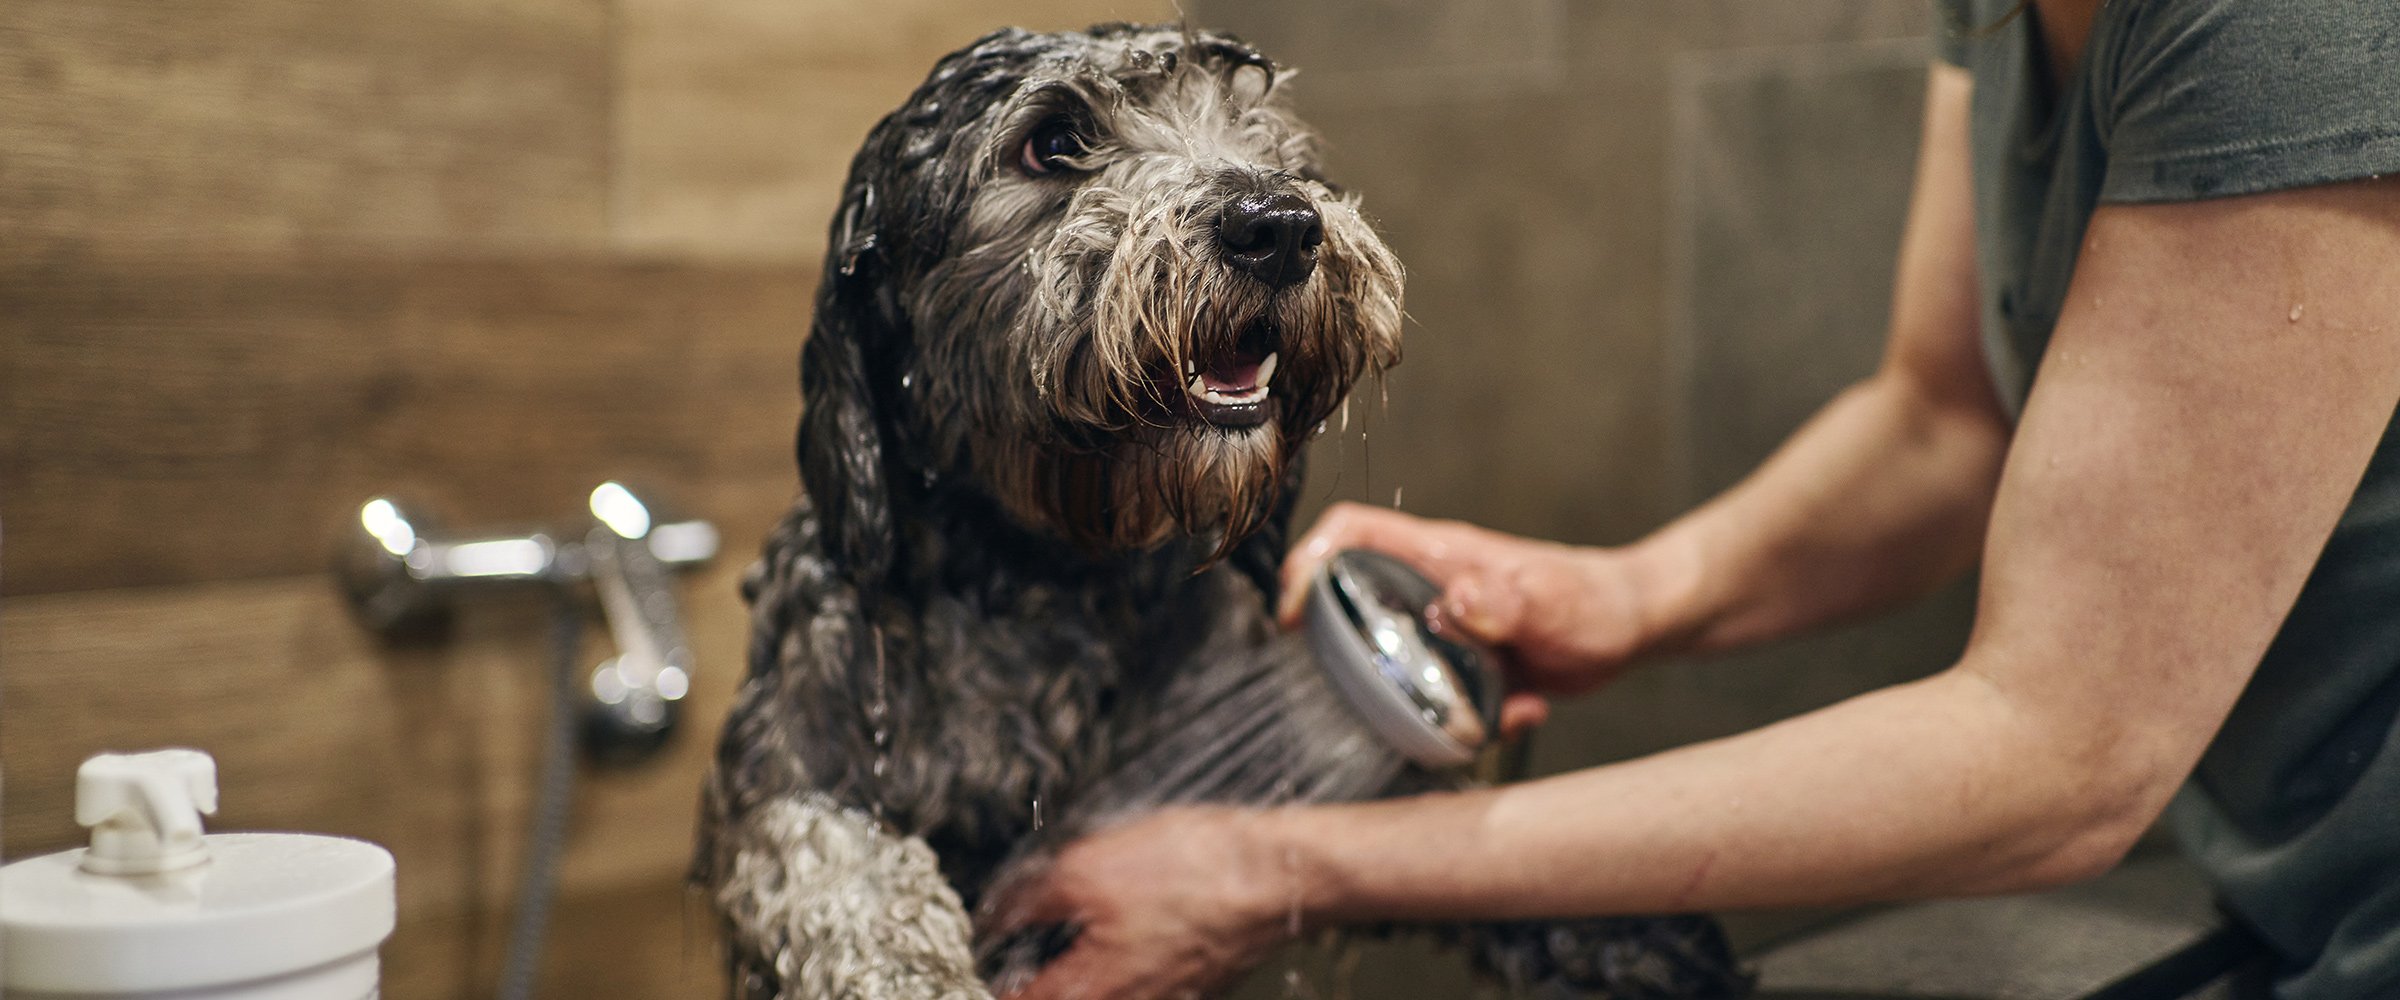 1.Dog-hygiene-and-care-(what-do-I-need-to-know)